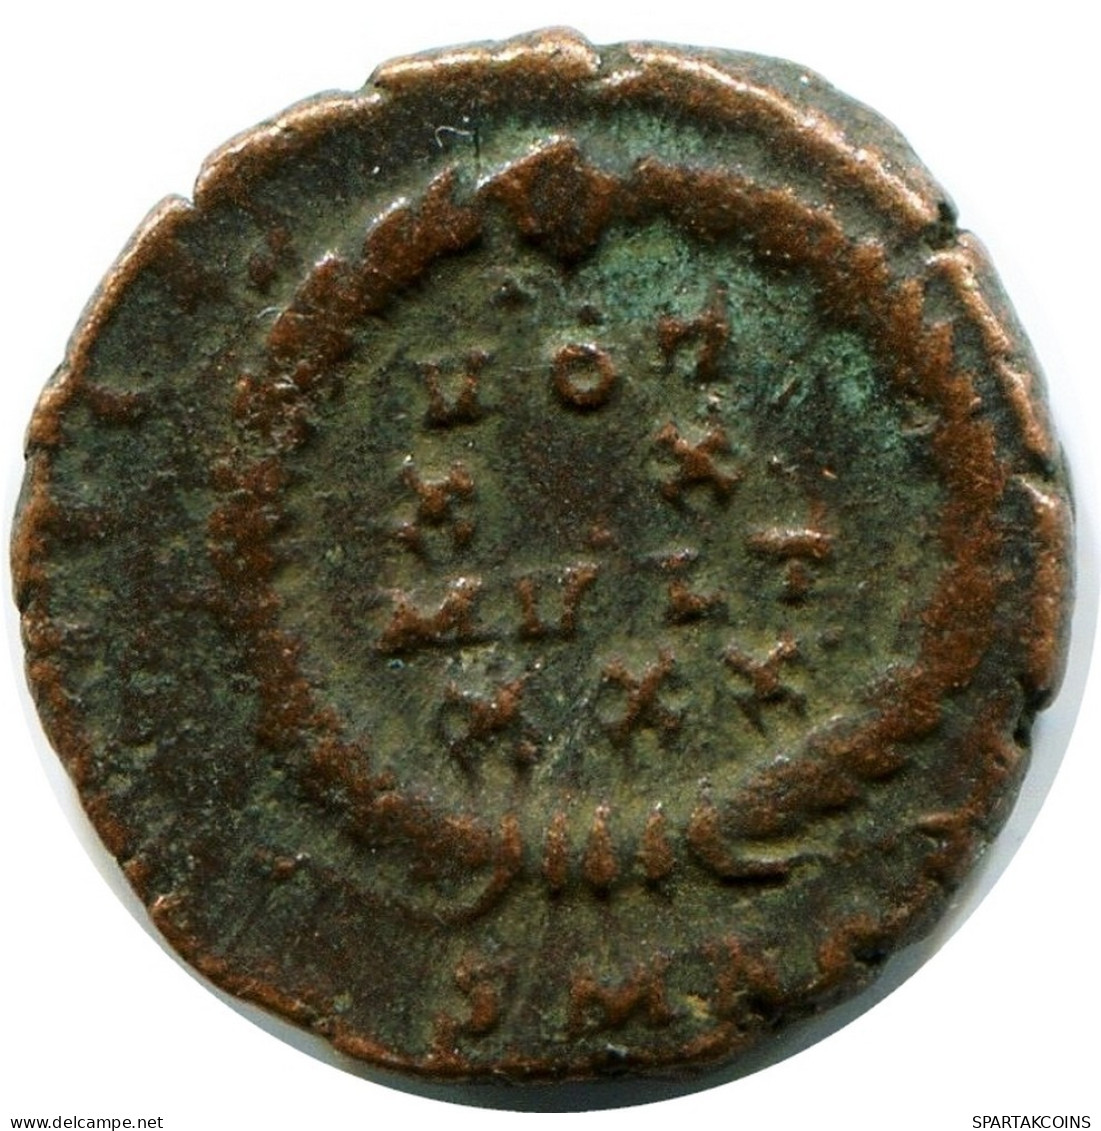 CONSTANS MINTED IN ANTIOCH FOUND IN IHNASYAH HOARD EGYPT #ANC11803.14.D.A - The Christian Empire (307 AD To 363 AD)